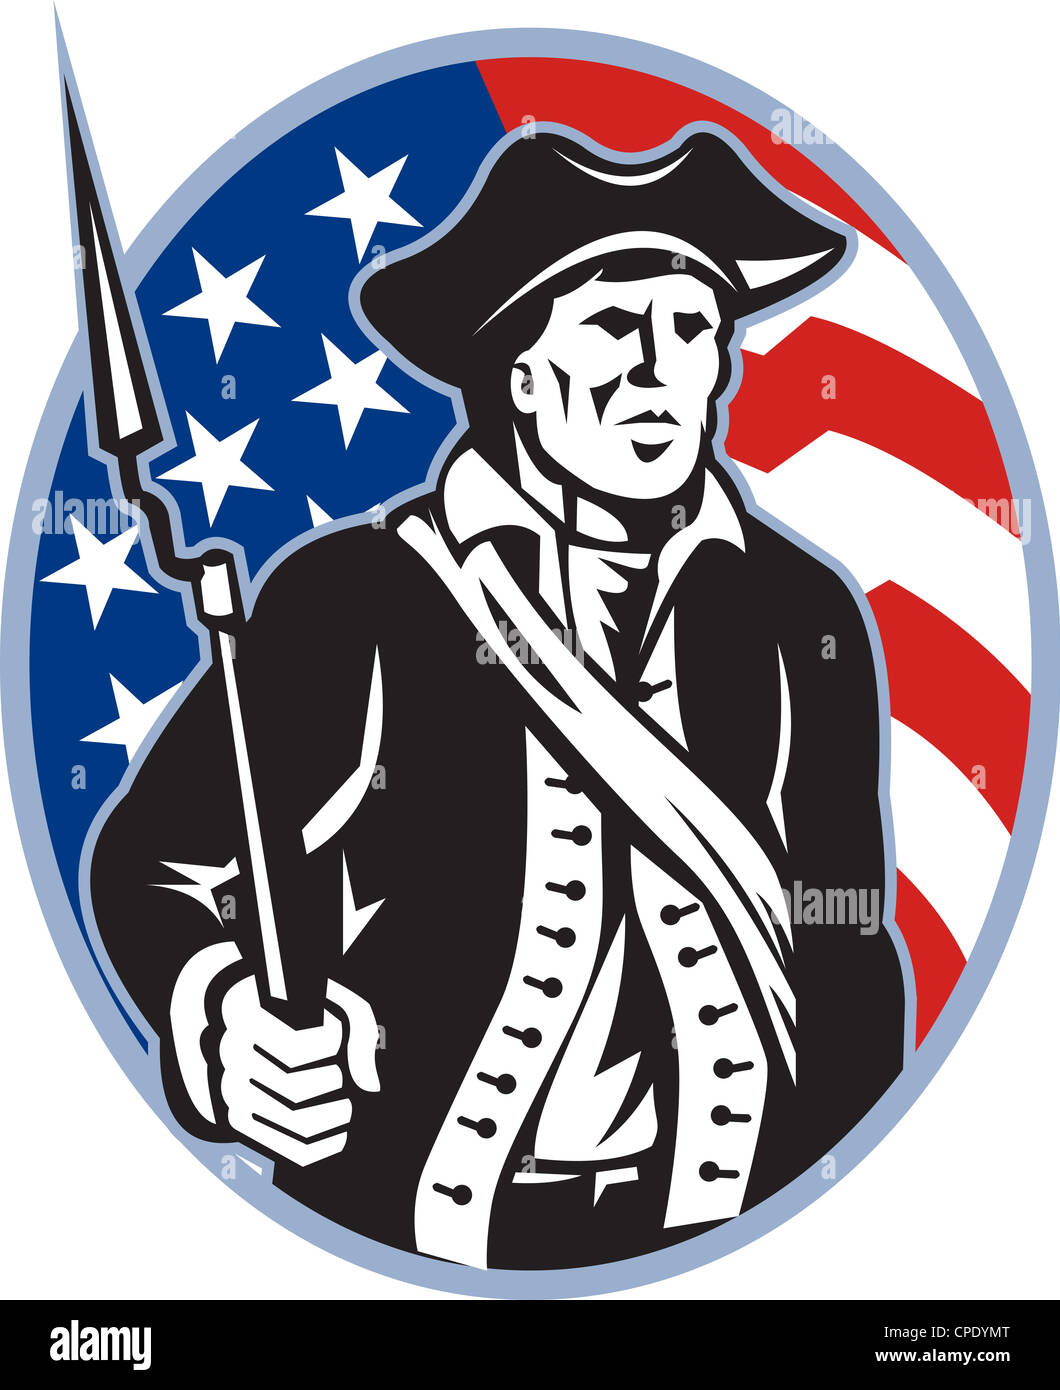 Illustration of an American patriot minuteman revolutionary soldier with musket bayonet rifle and stars and stripes flag Stock Photo